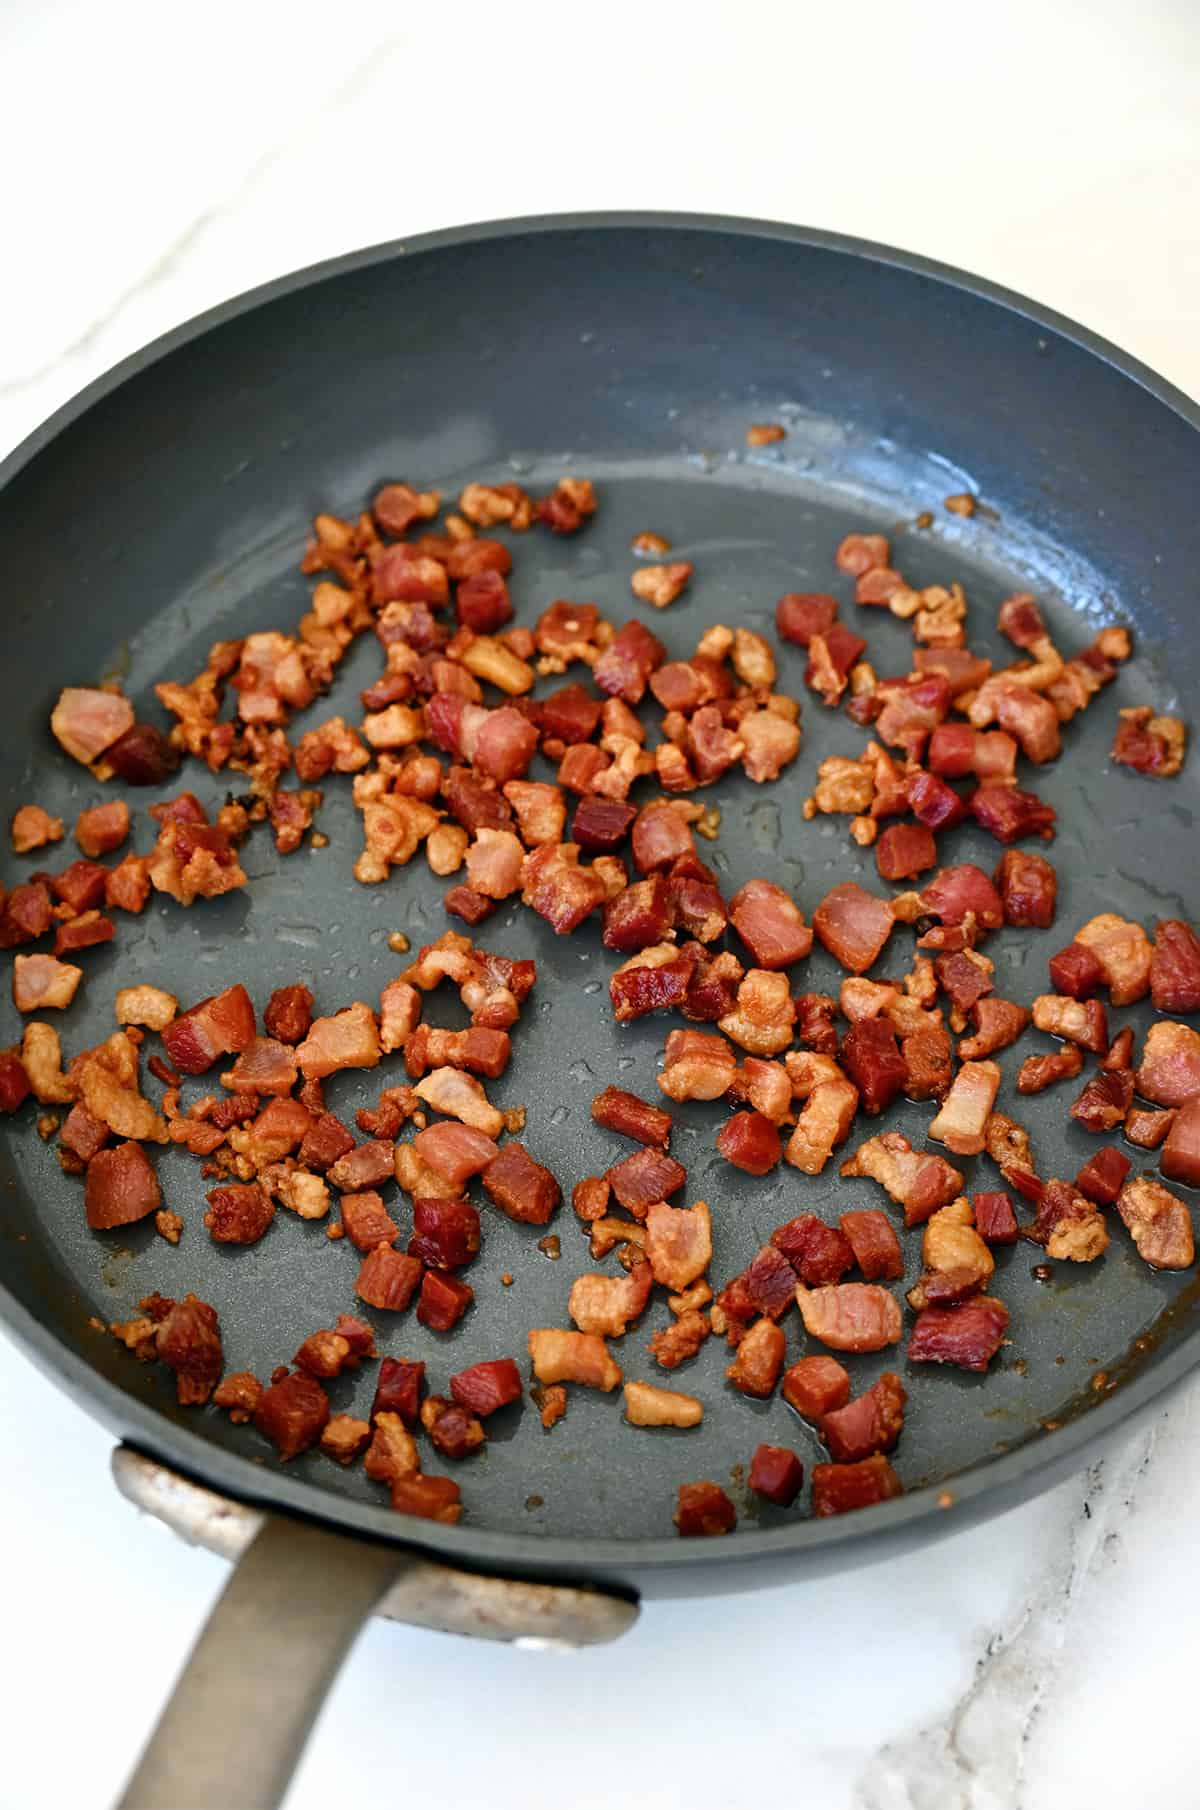 Crispy cooked pancetta pieces in a nonstick skillet.